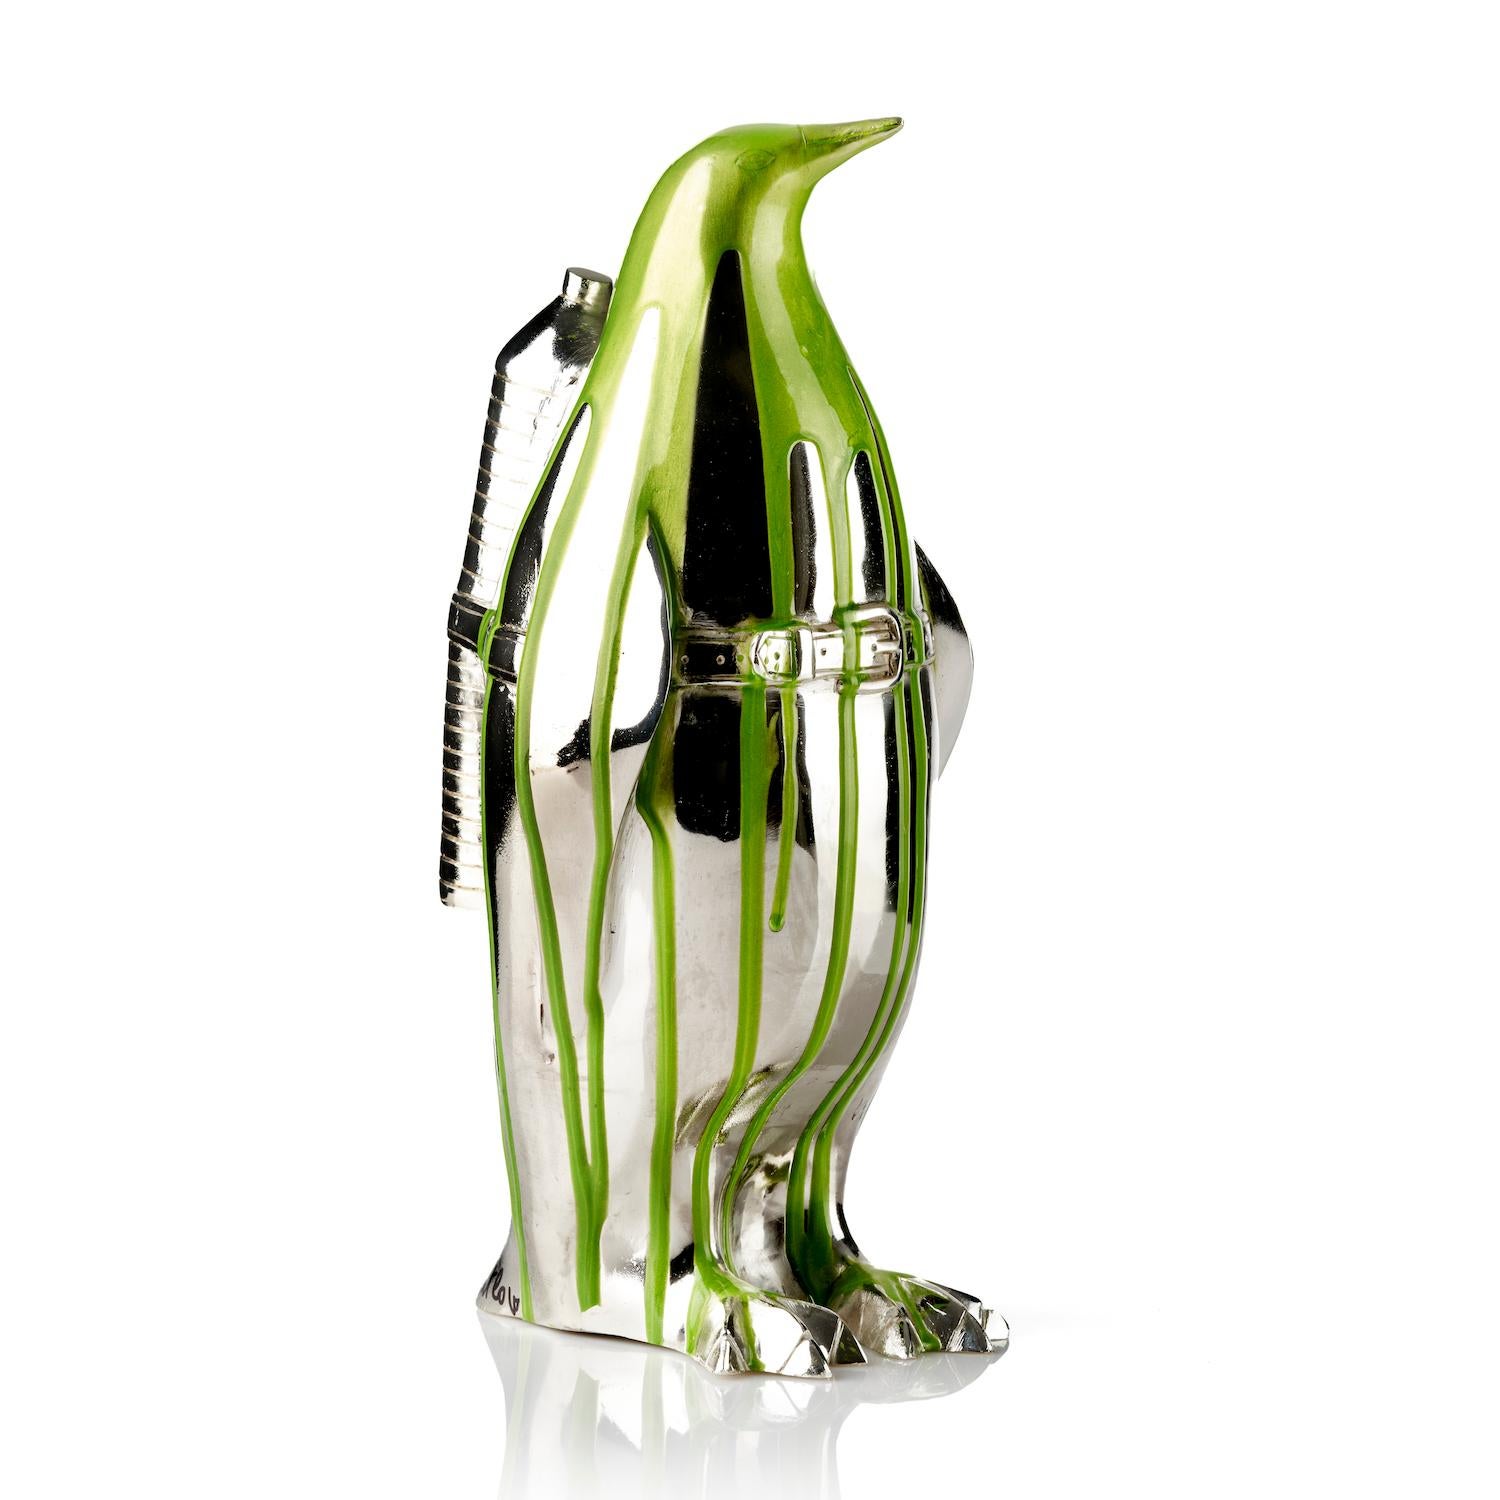 Cloned Penguin with pet bottle (green) - Sculpture by William Sweetlove